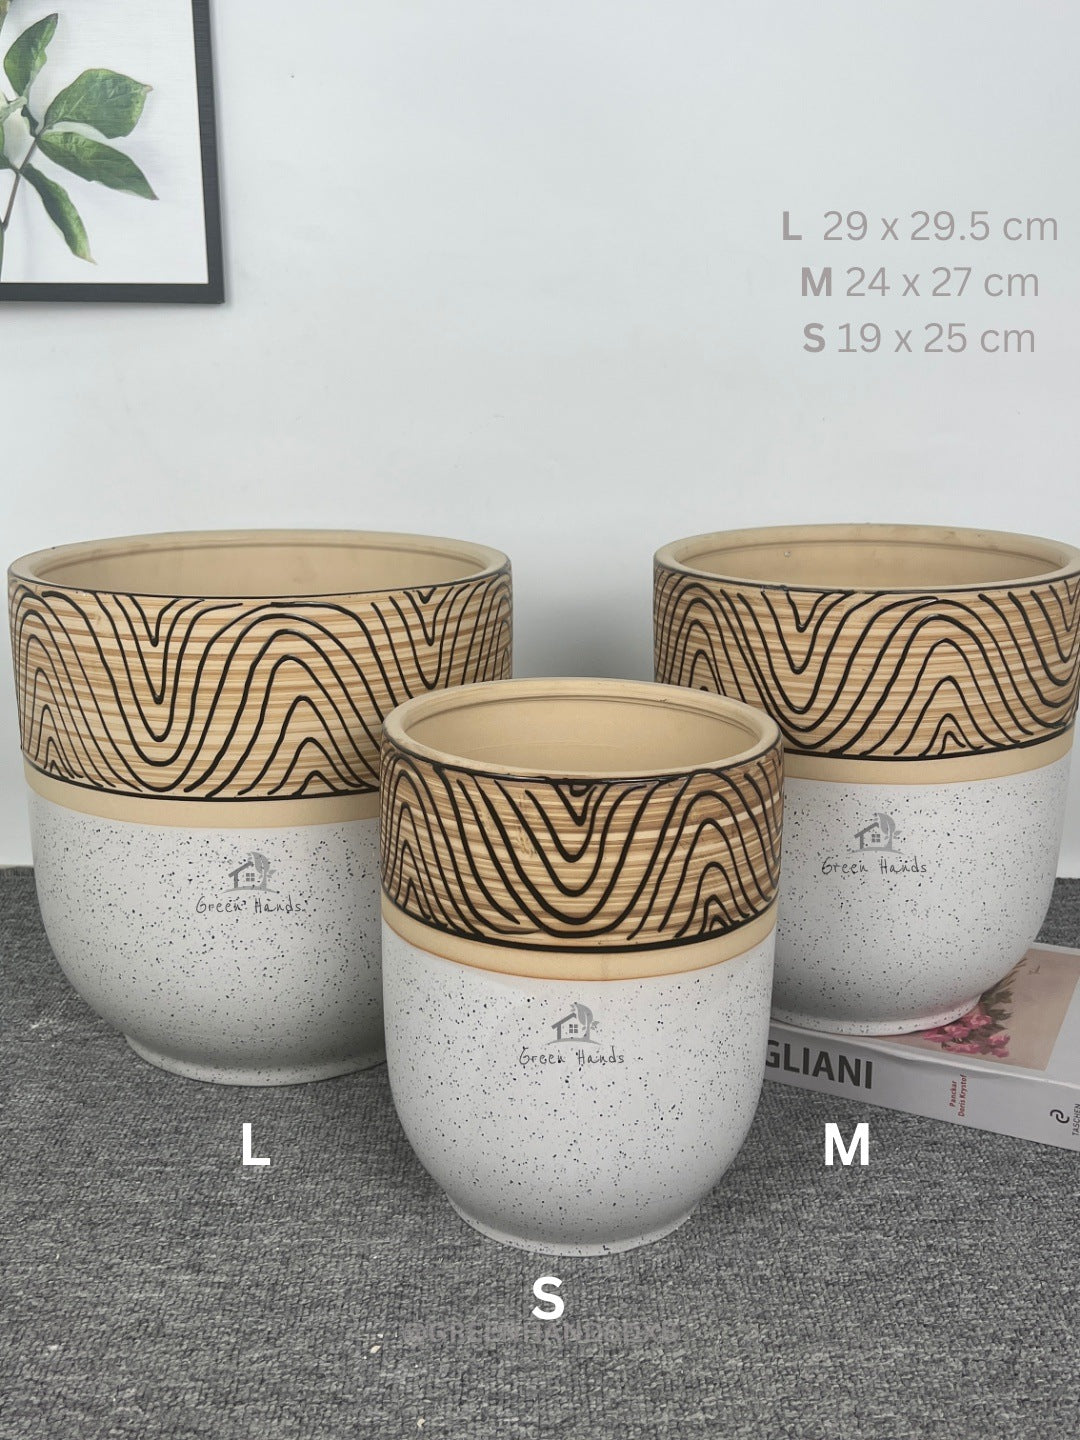 Wooden White Ceramic Pots: Nature-Inspired Artistry in UAE